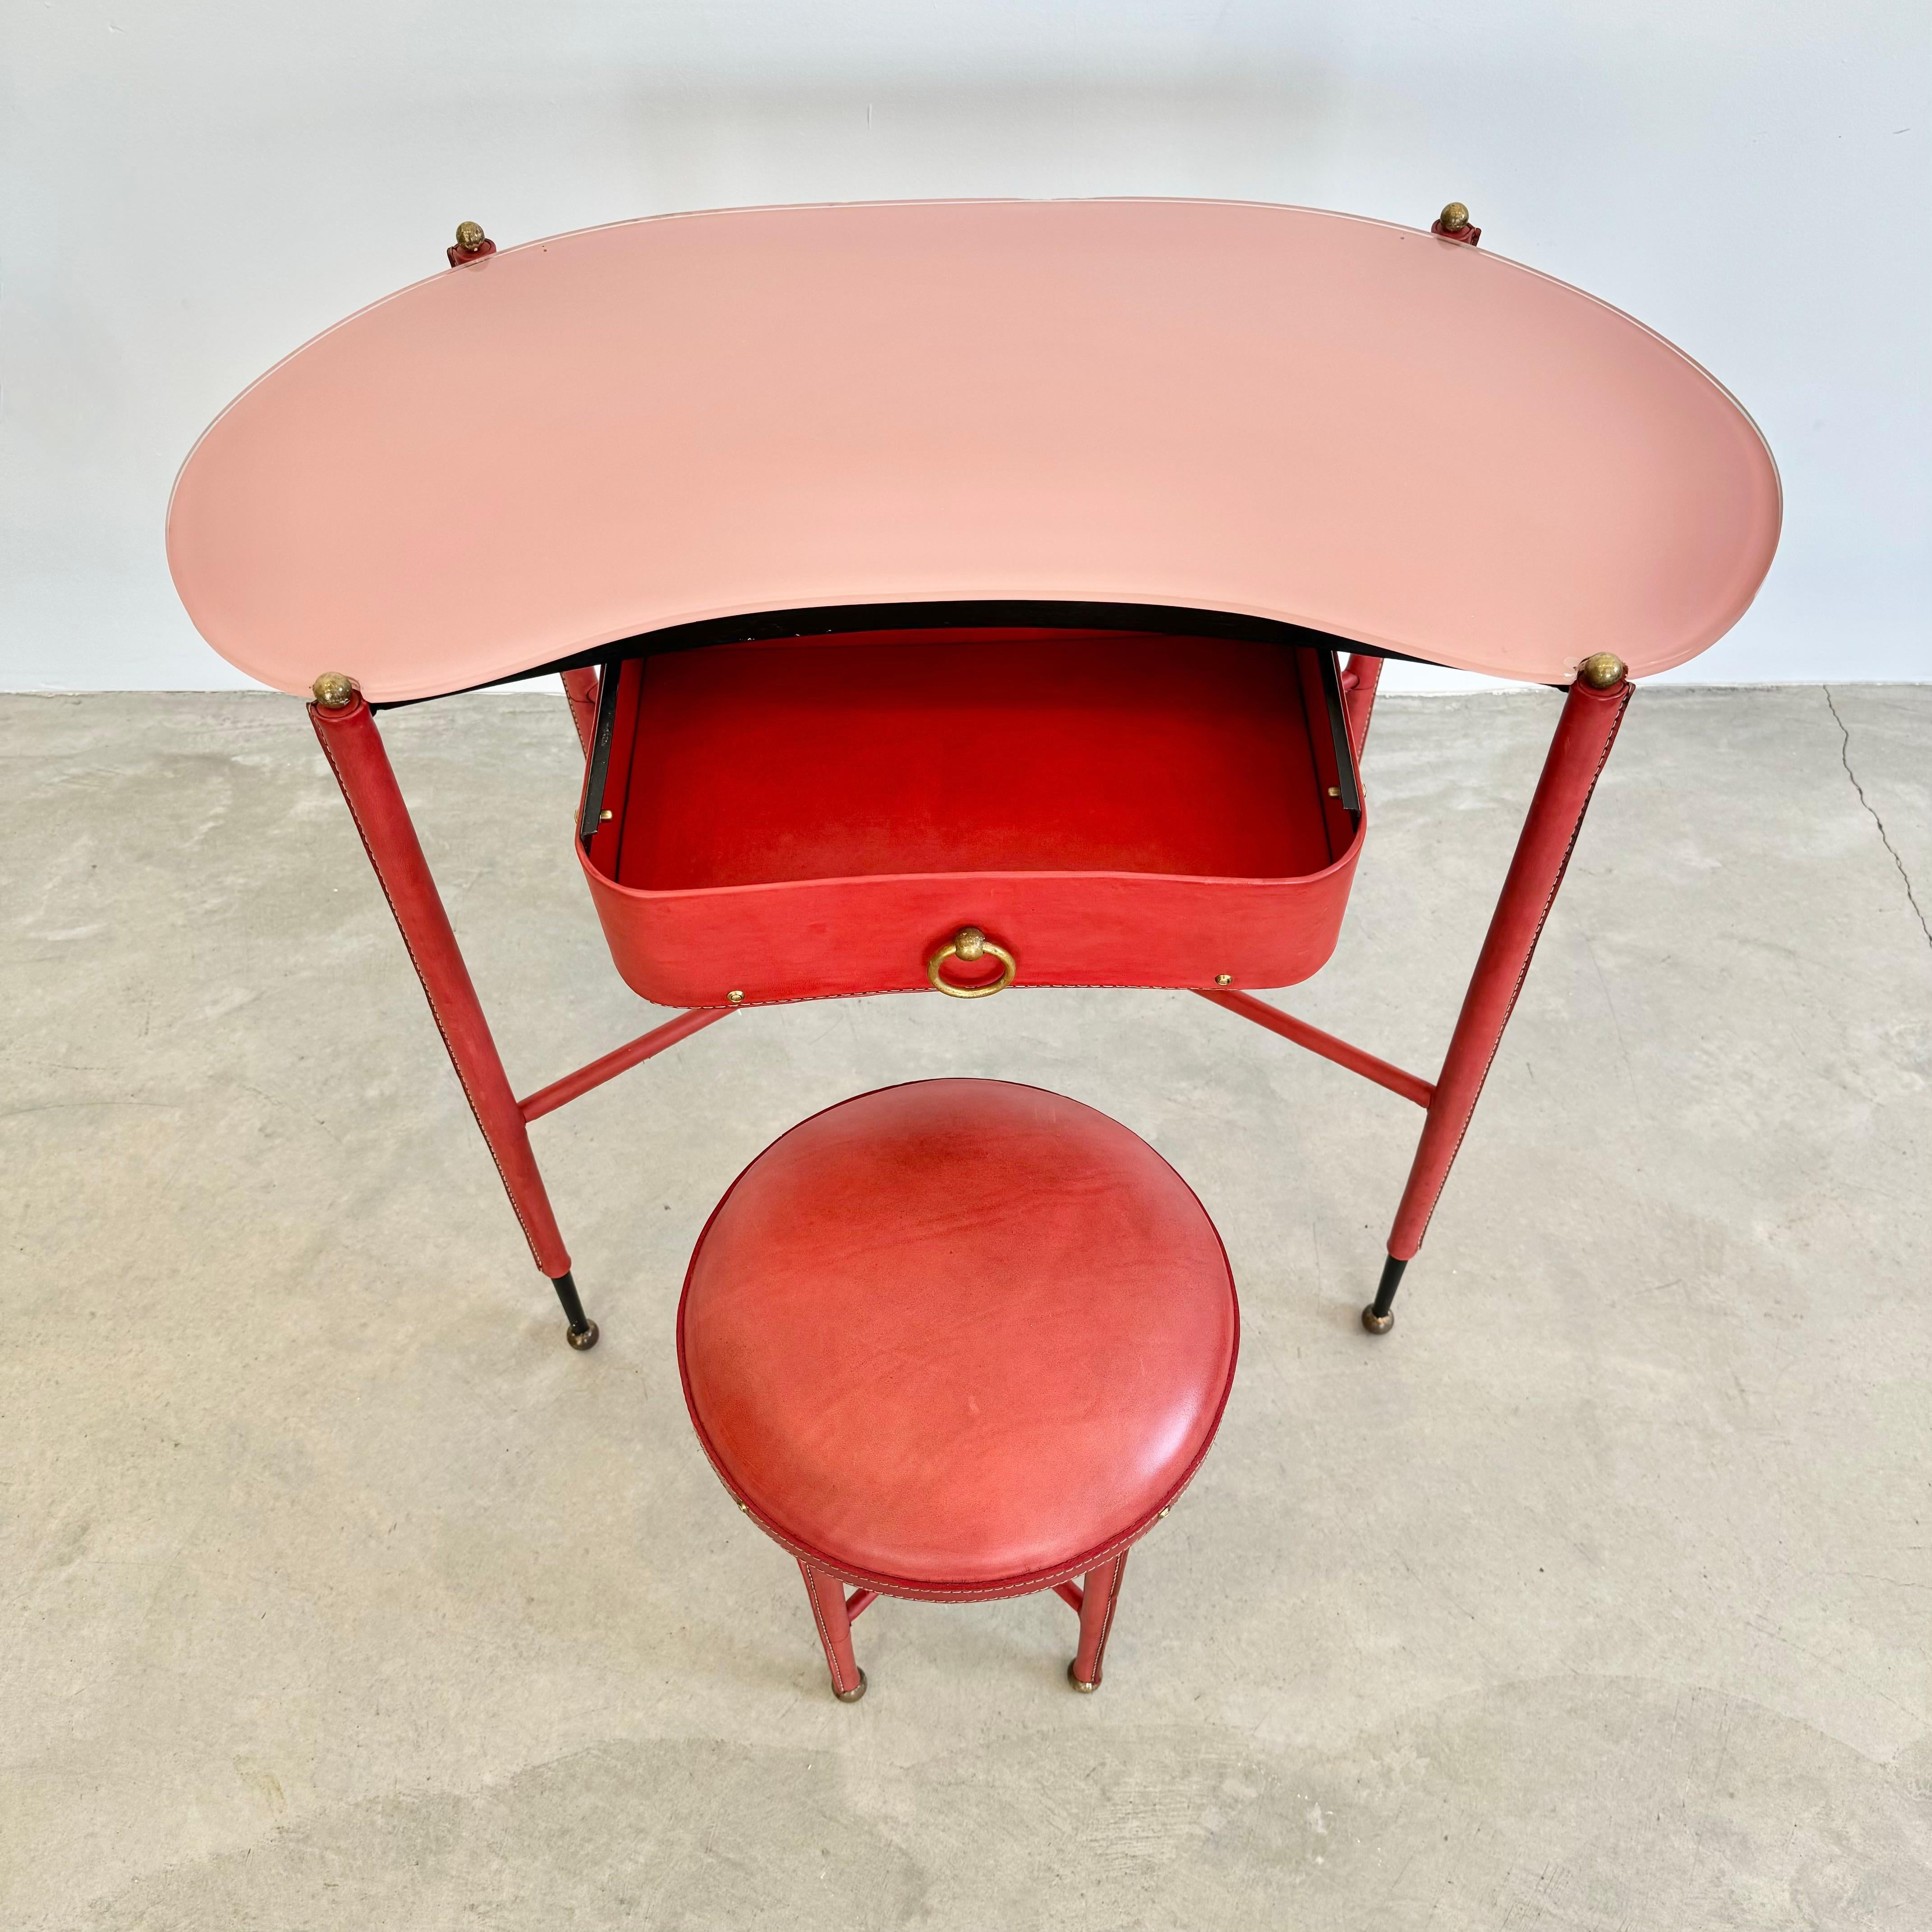 Stunning vanity by French designer Jacques Adnet. Iron frame completely wrapped in red leather. Legs taper down to sharp exposed iron and end with brass ball feet. Tops of each leg is also topped with a brass ball which holds glass table top in